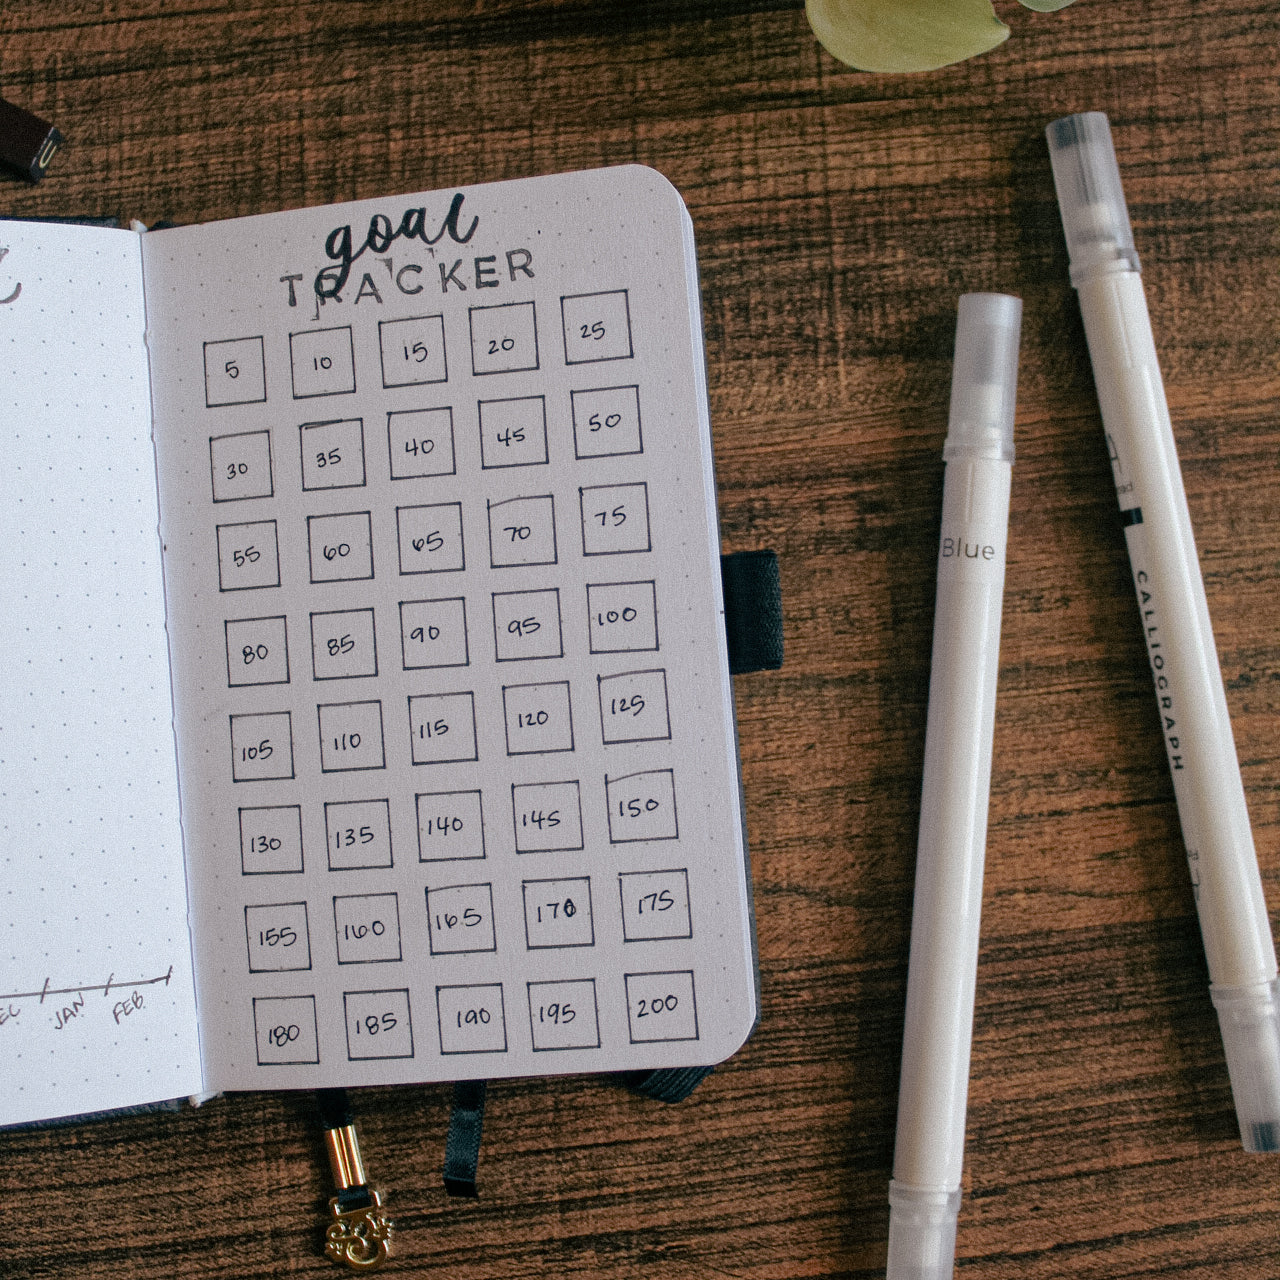 A notebook is lying open on a desk. On the page are the words Goal Tracker at the top. Then there are 40 square , 8x5 with numbers labeled in increments of 5 up to 200 to track running goals.